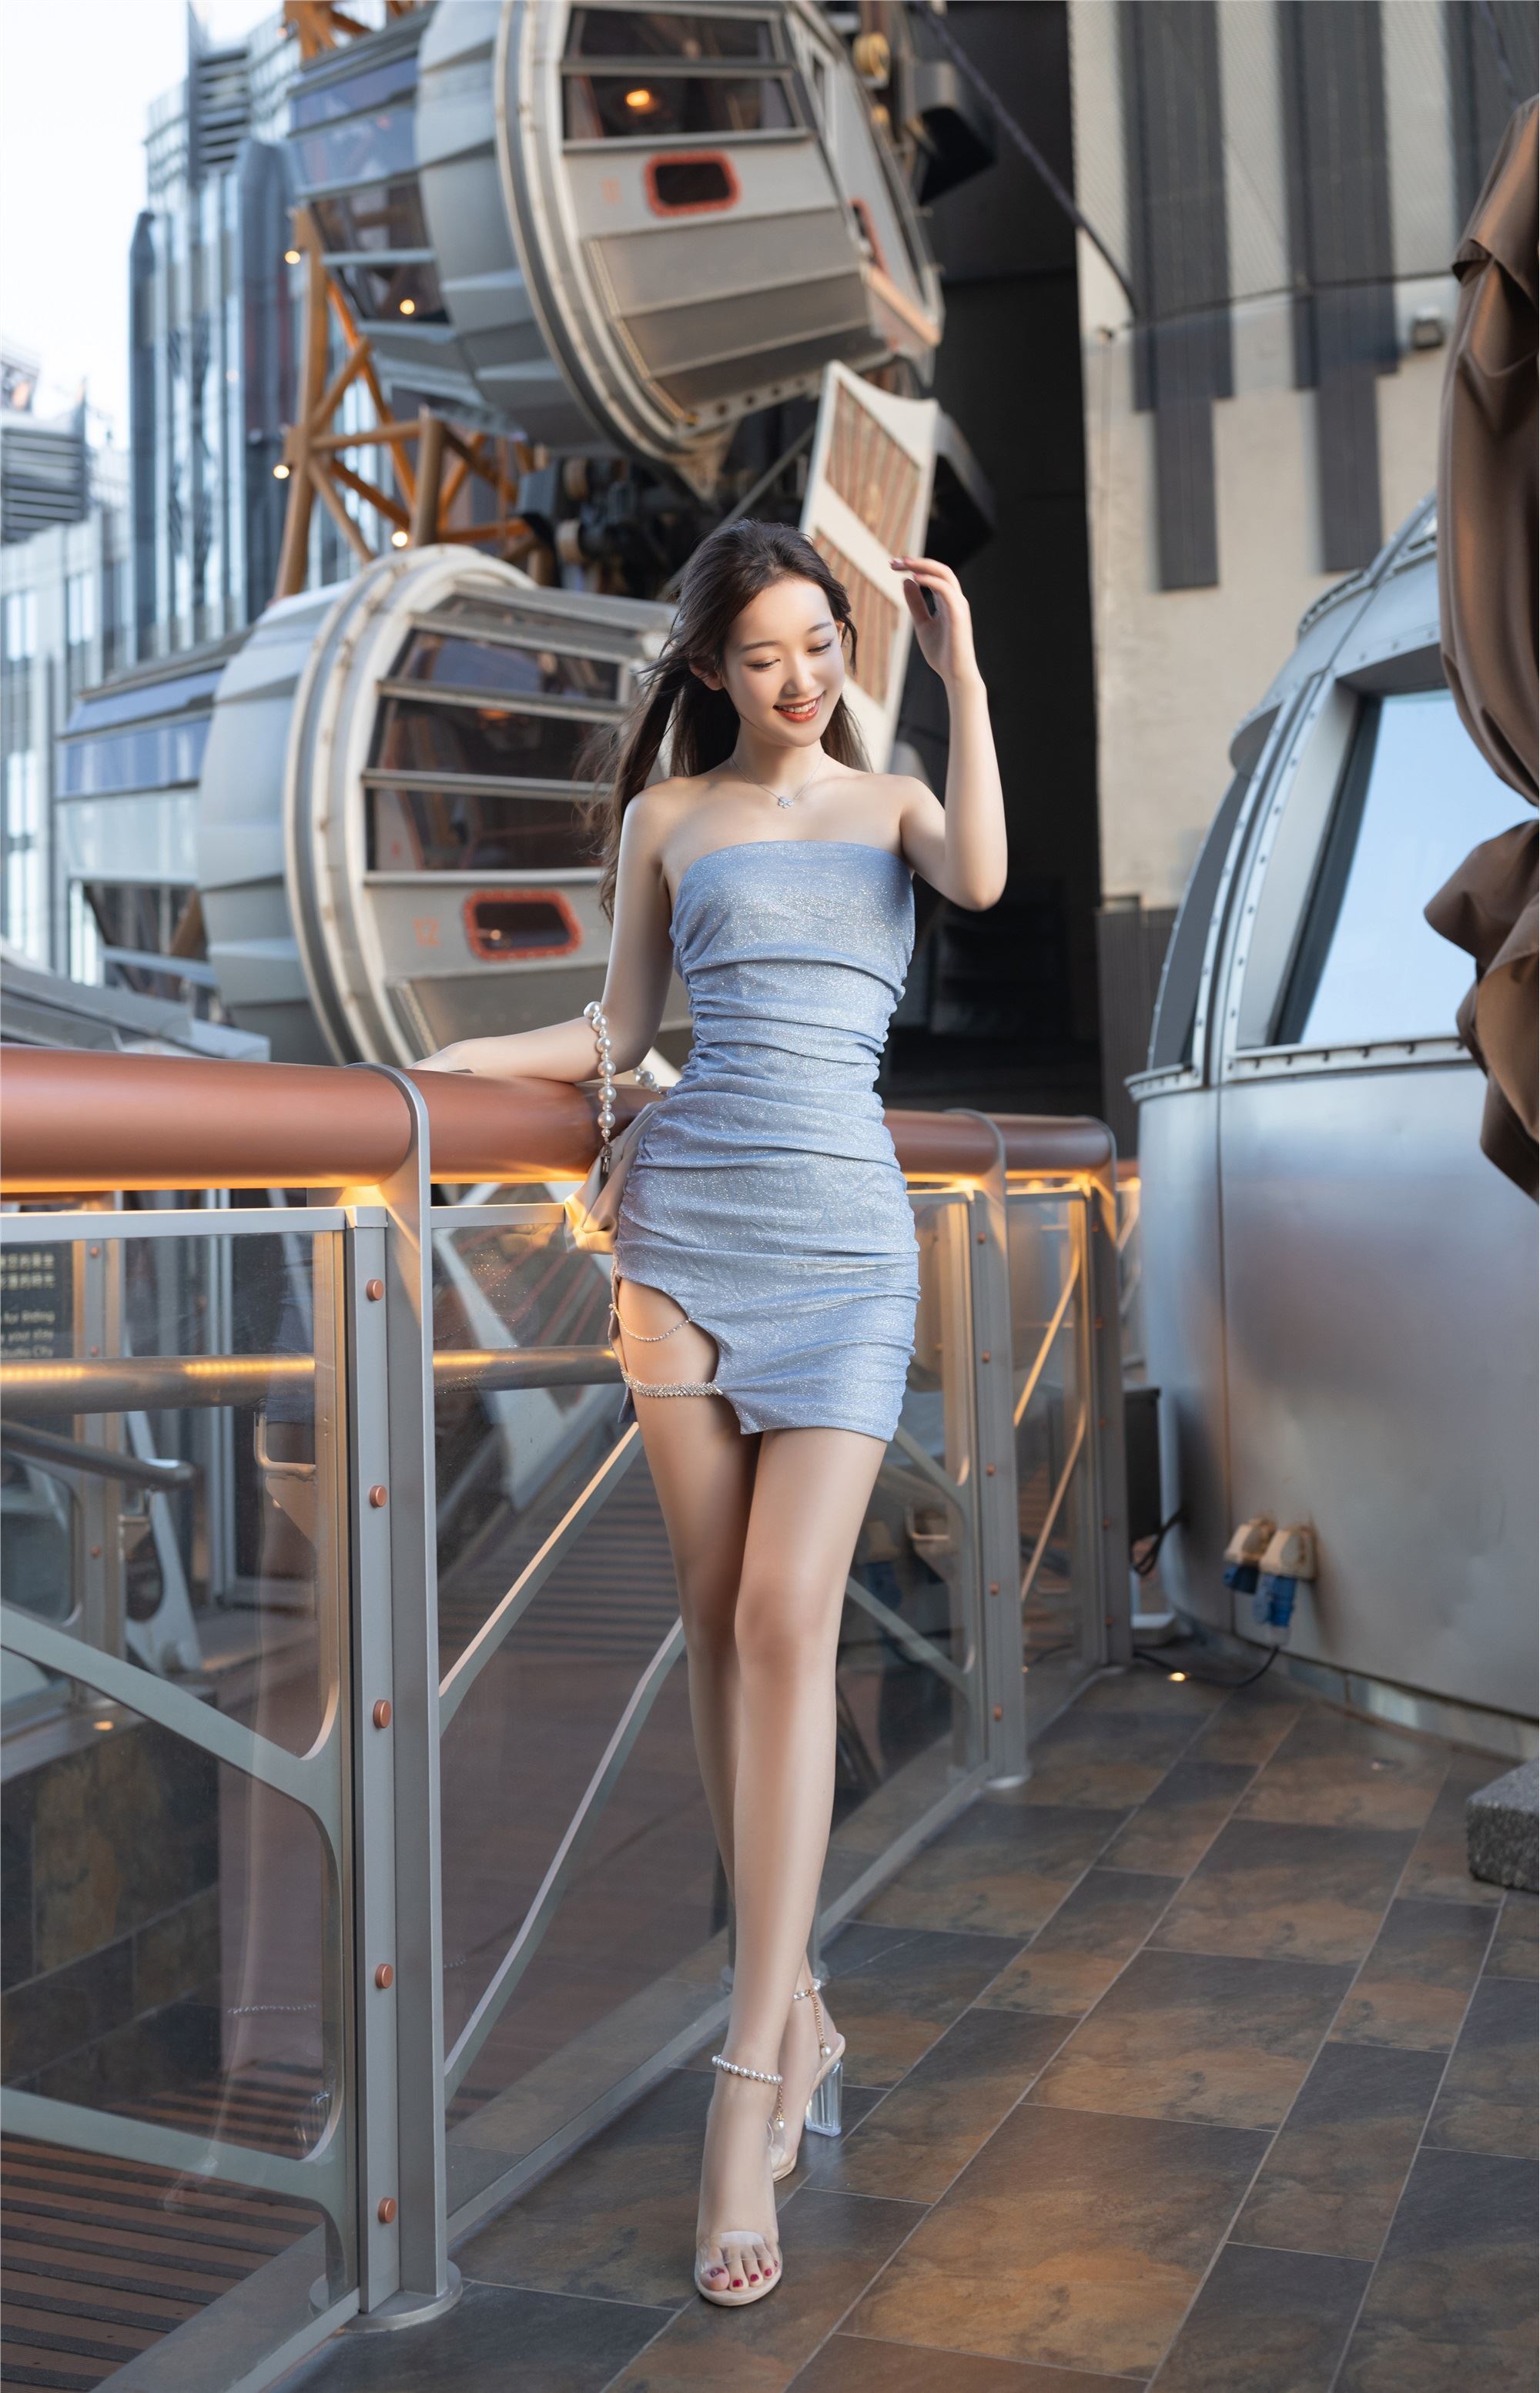 016. Angie Tang - a travel-themed photo of her girlfriend